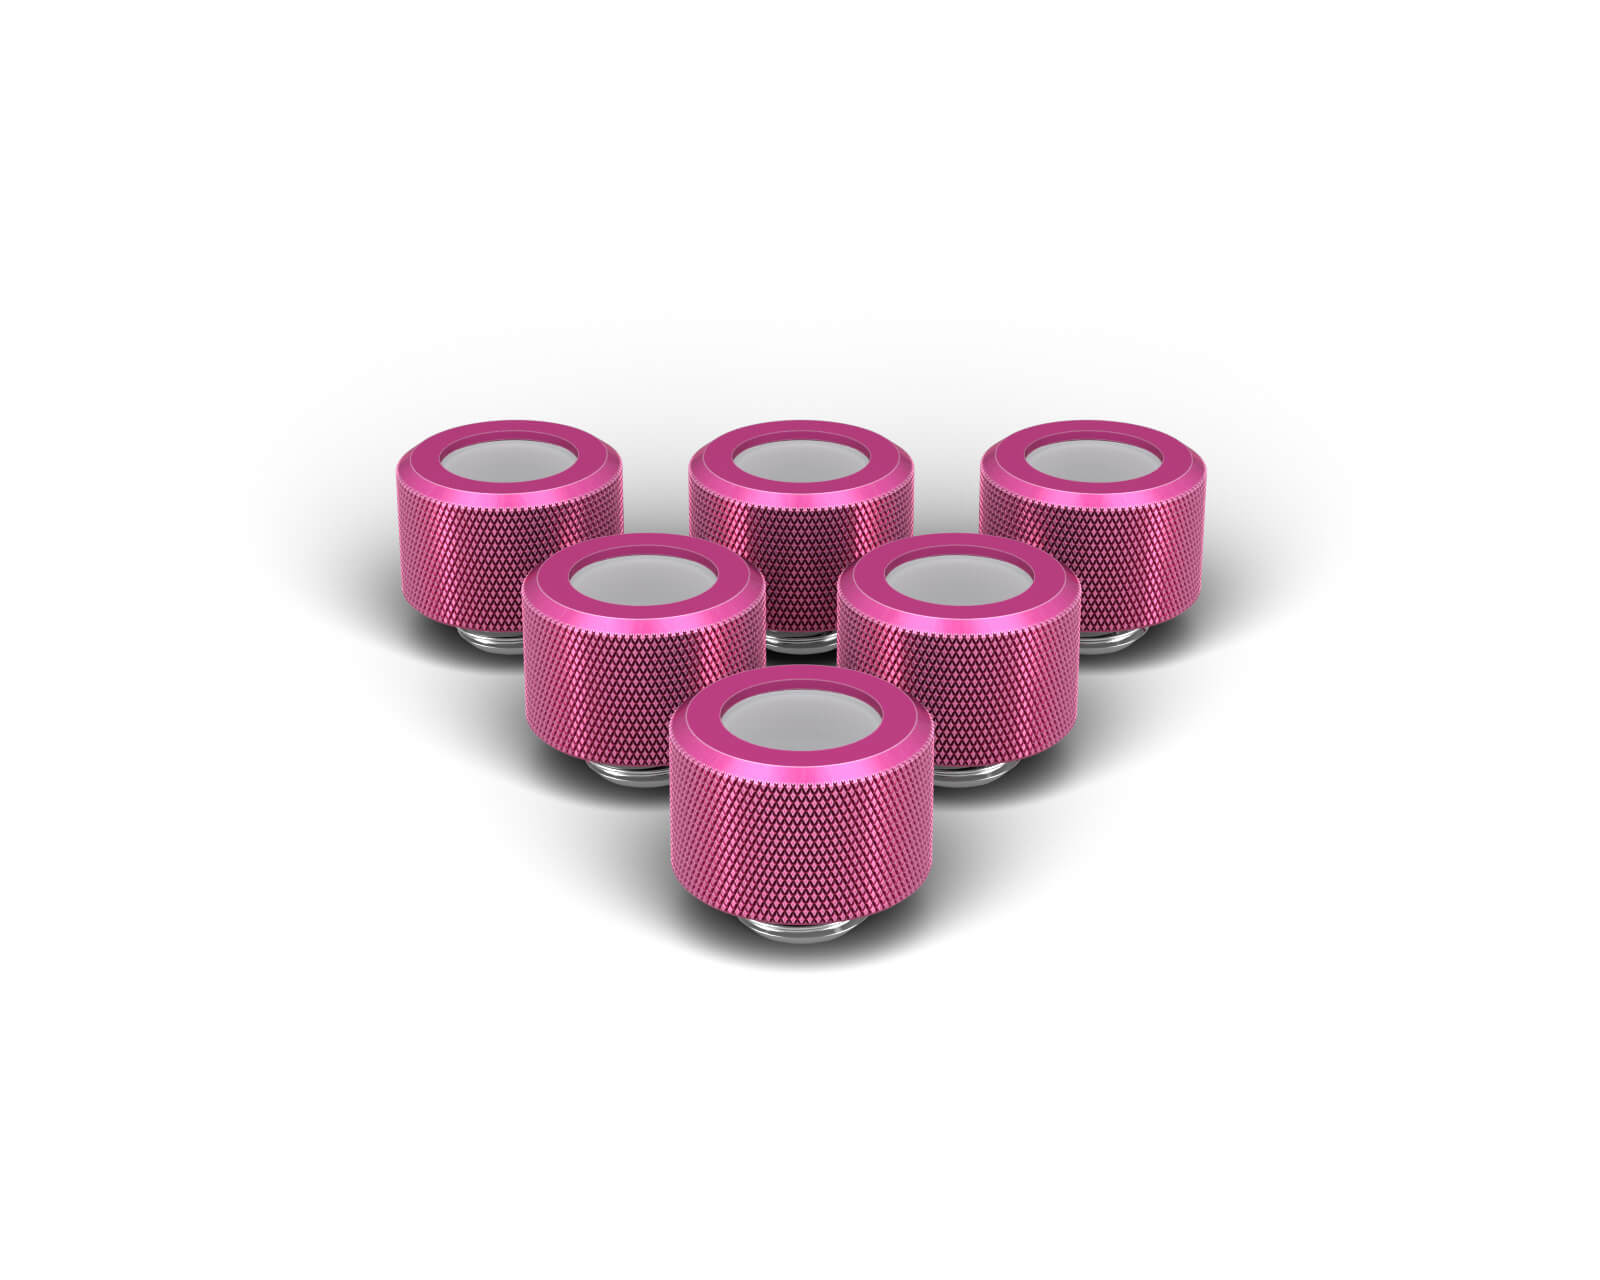 PrimoChill 14mm OD Rigid SX Fitting - 6 Pack - PrimoChill - KEEPING IT COOL Candy Pink